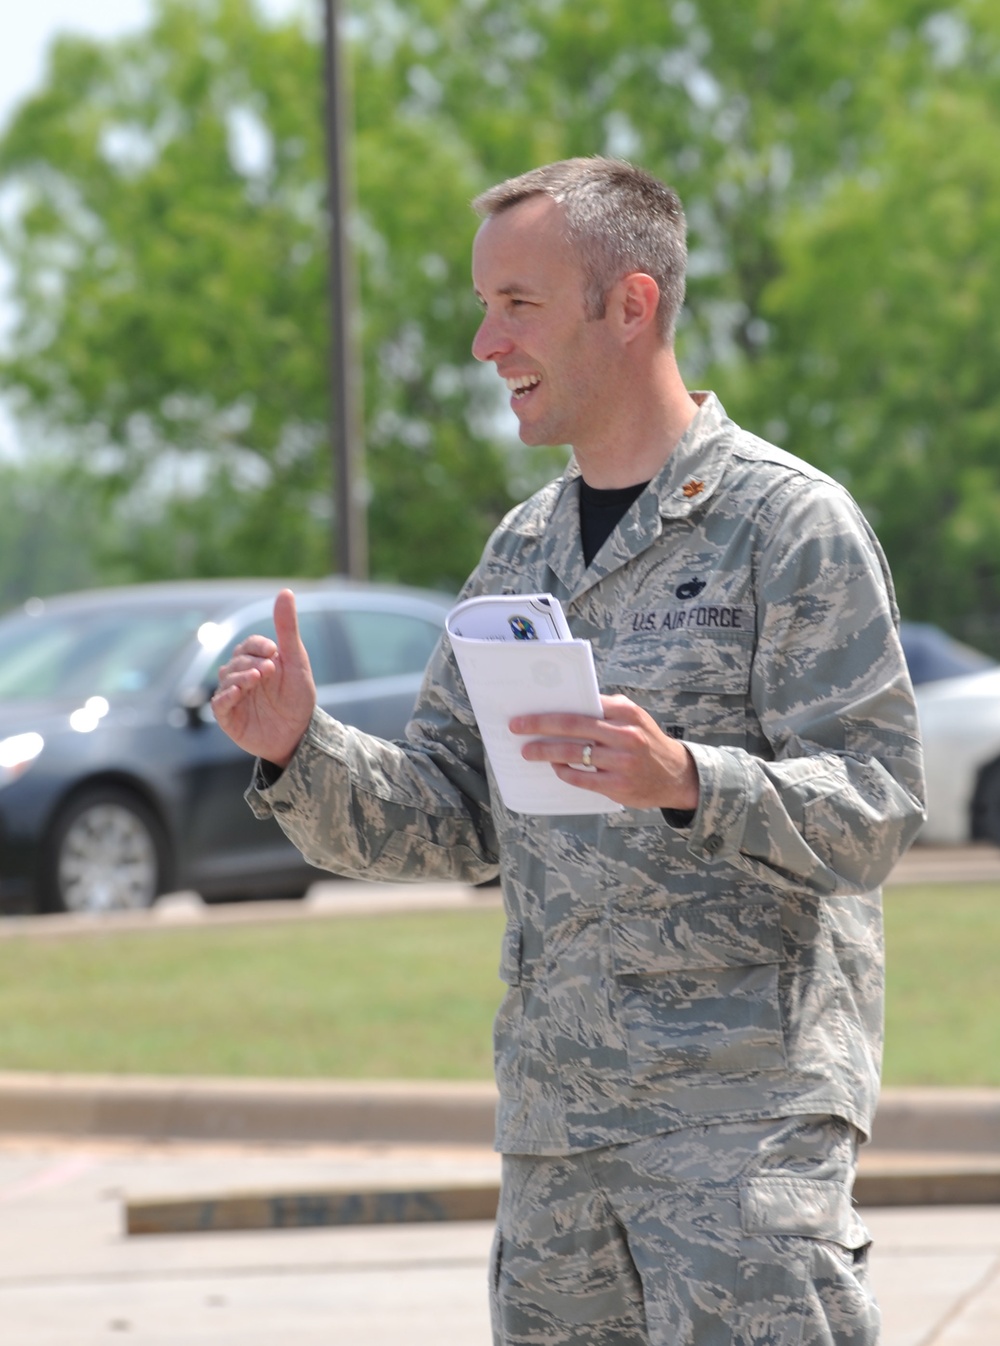 First quarterly bomb build competition showcases skills of 7th MUNS Airmen